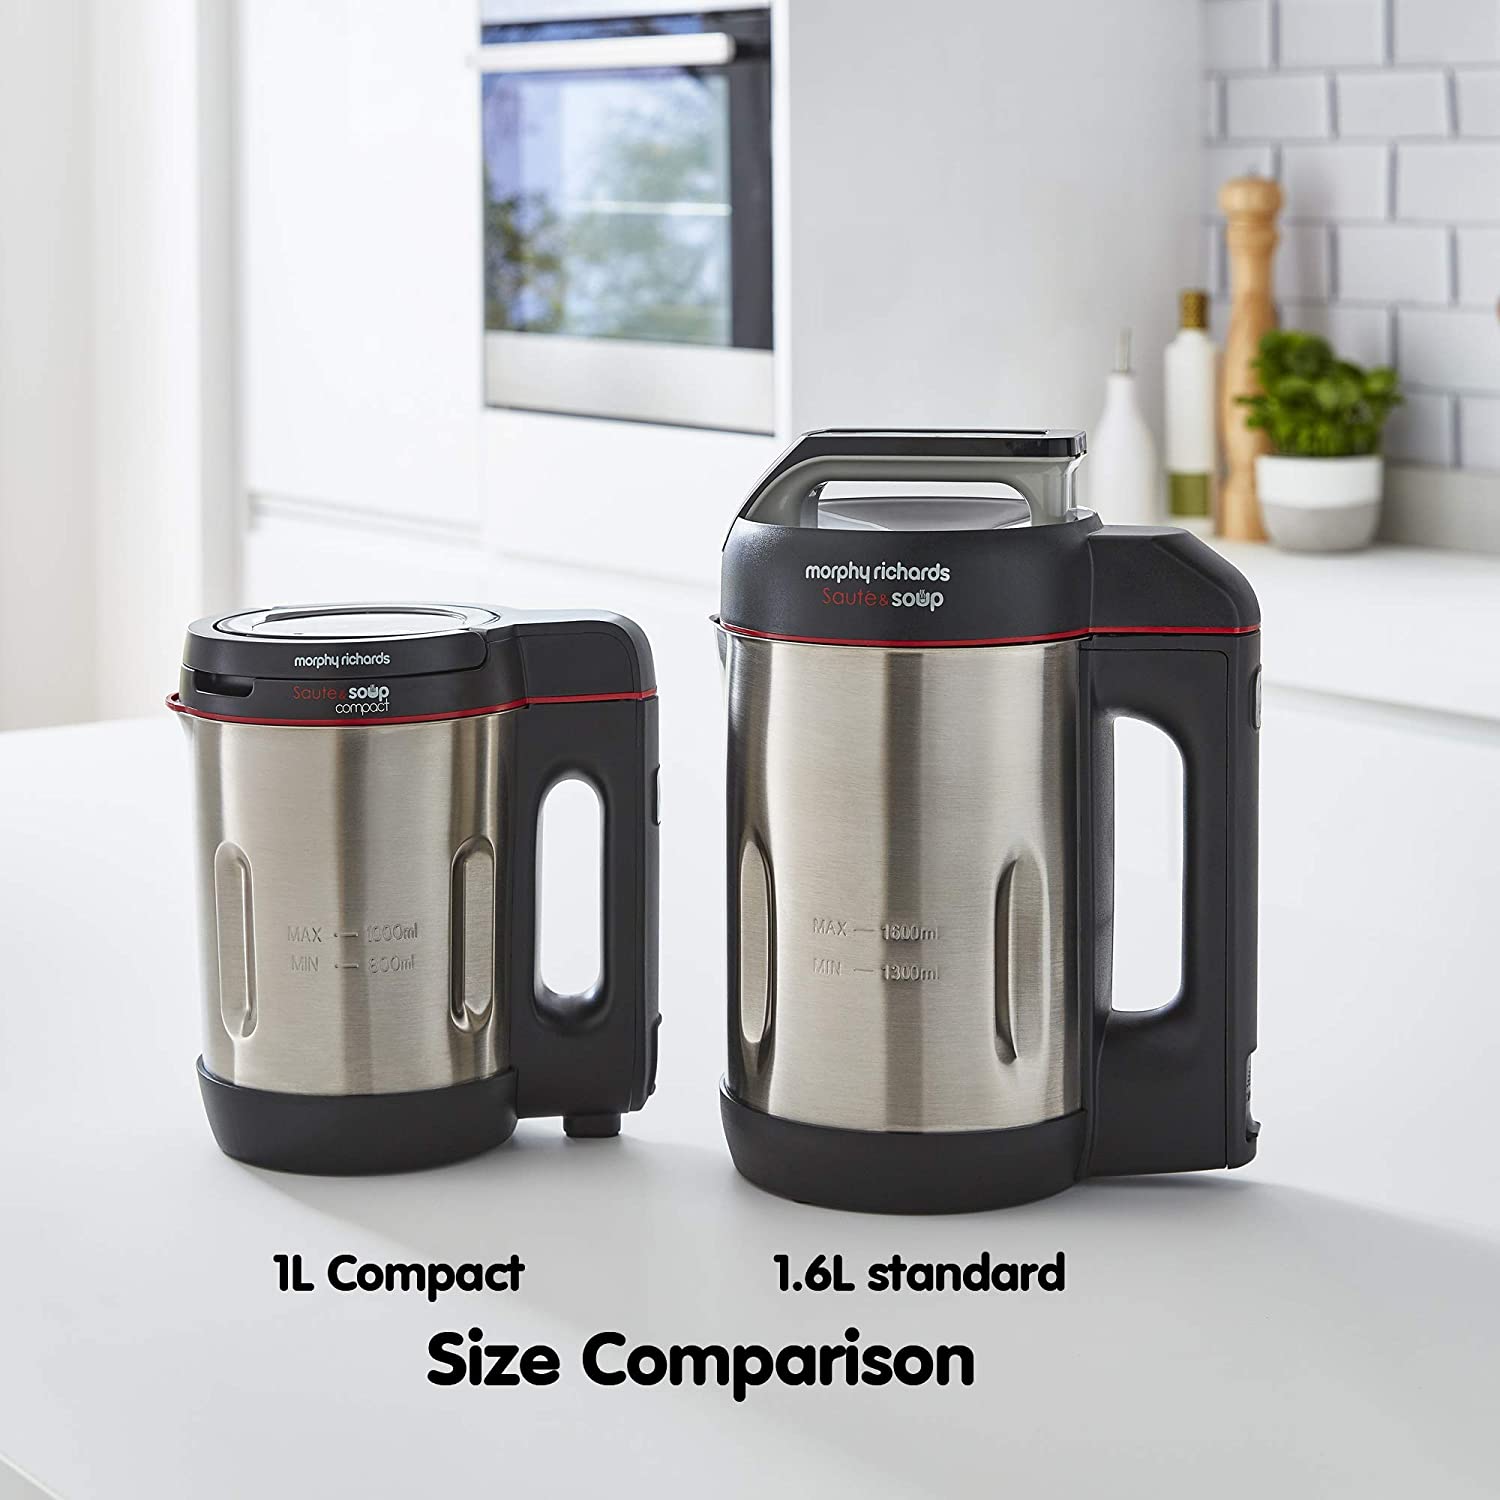 Morphy Richards 501027 Compact Saute & Soup Maker, Stainless Steel, 900 W, 1 Liter, Brushed Aluminium and Black